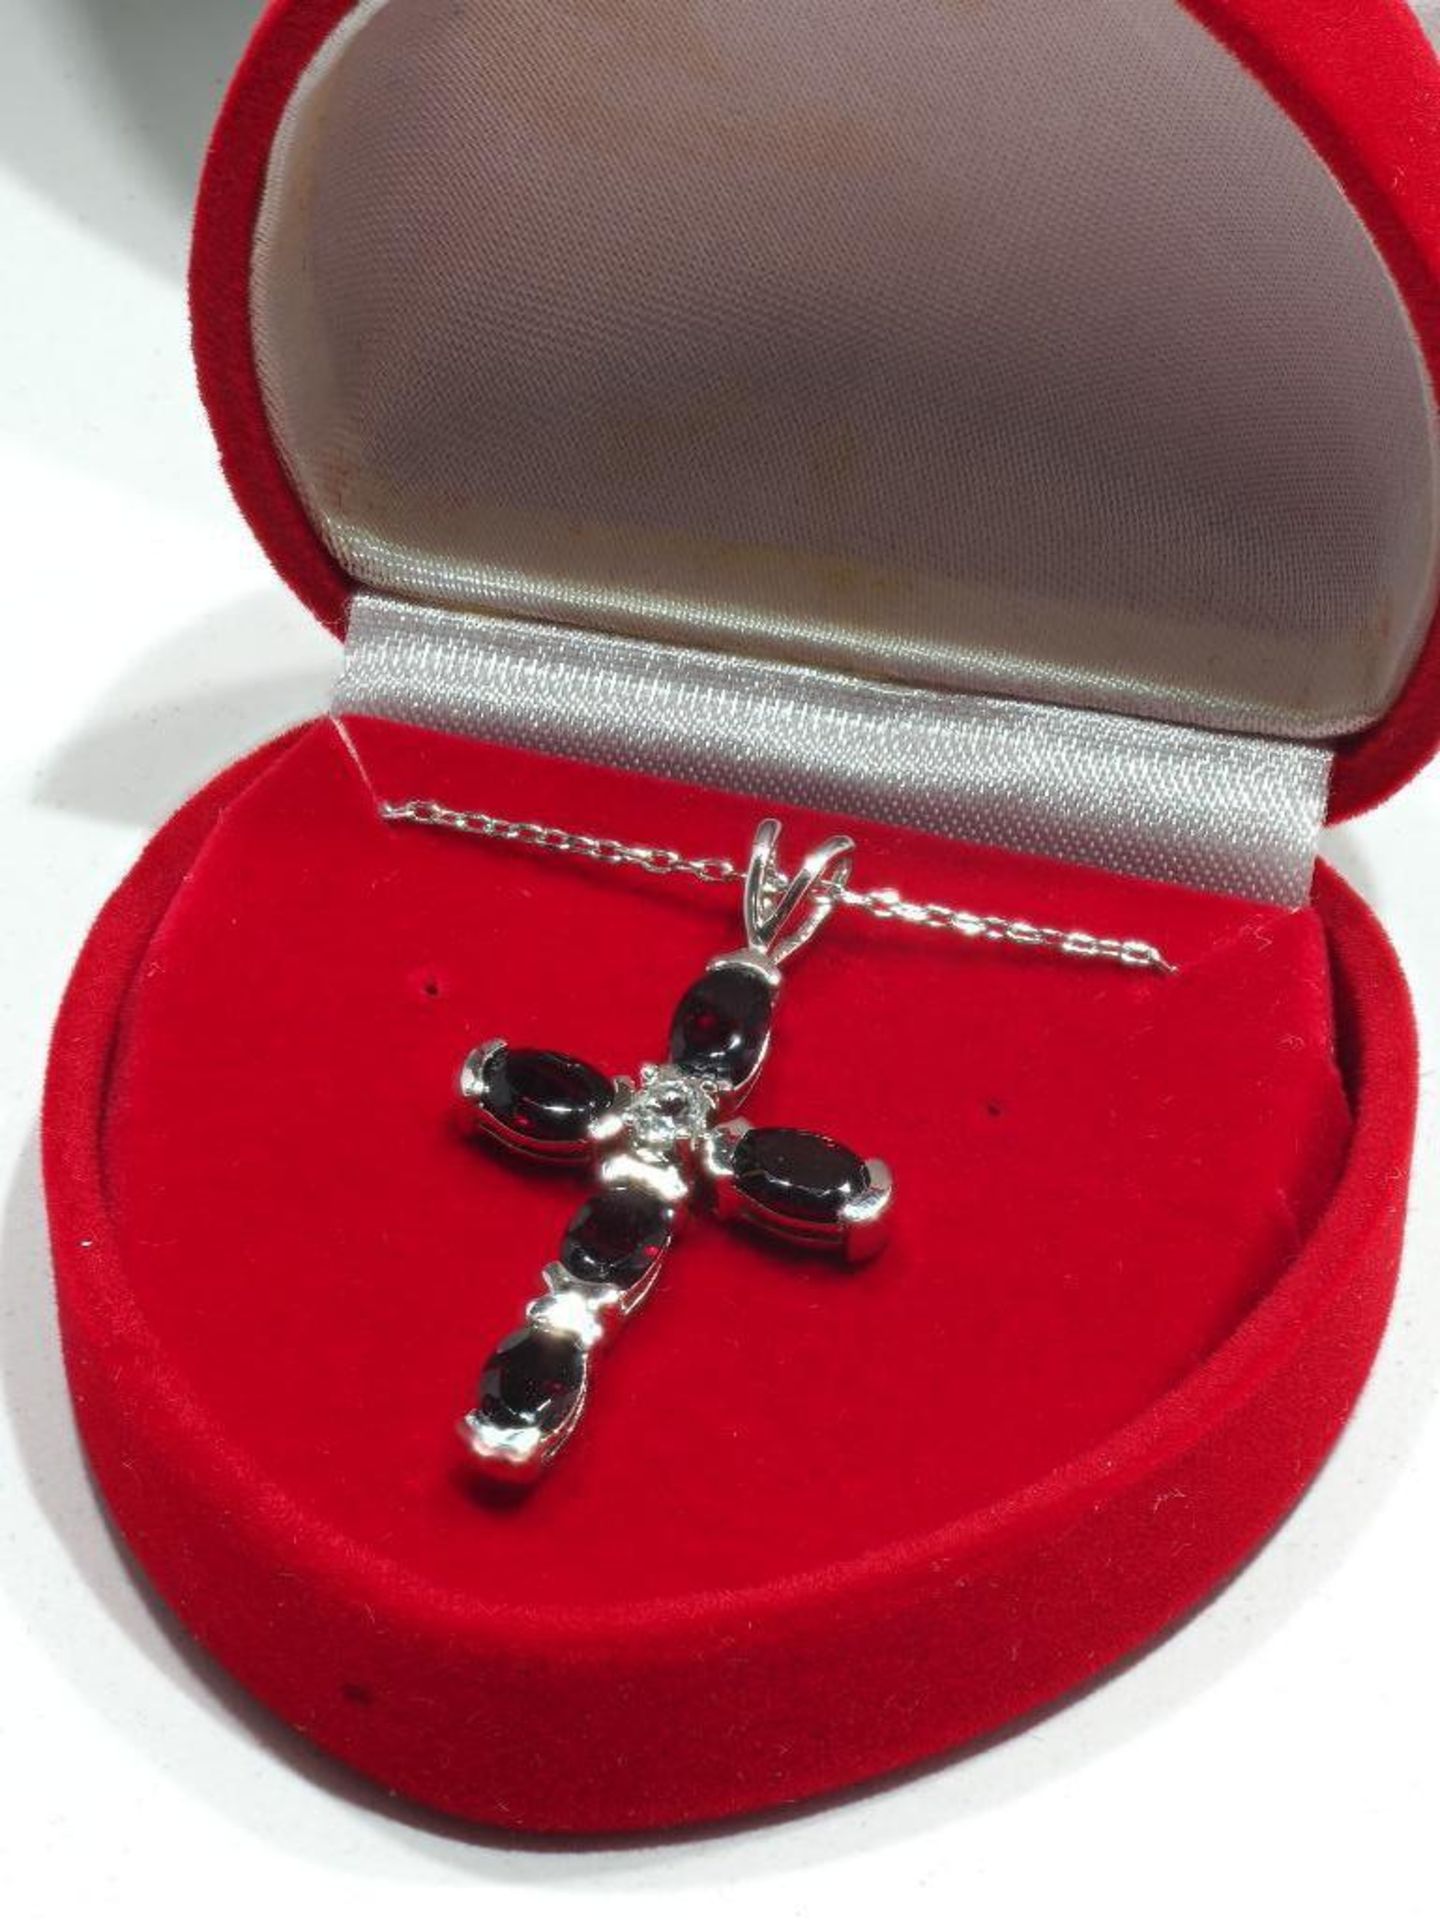 Sterling Silver Genuine Garnet (January Birthstone) Cross Pendant with Chain. Retail $300 (03-LS13) - Image 2 of 2